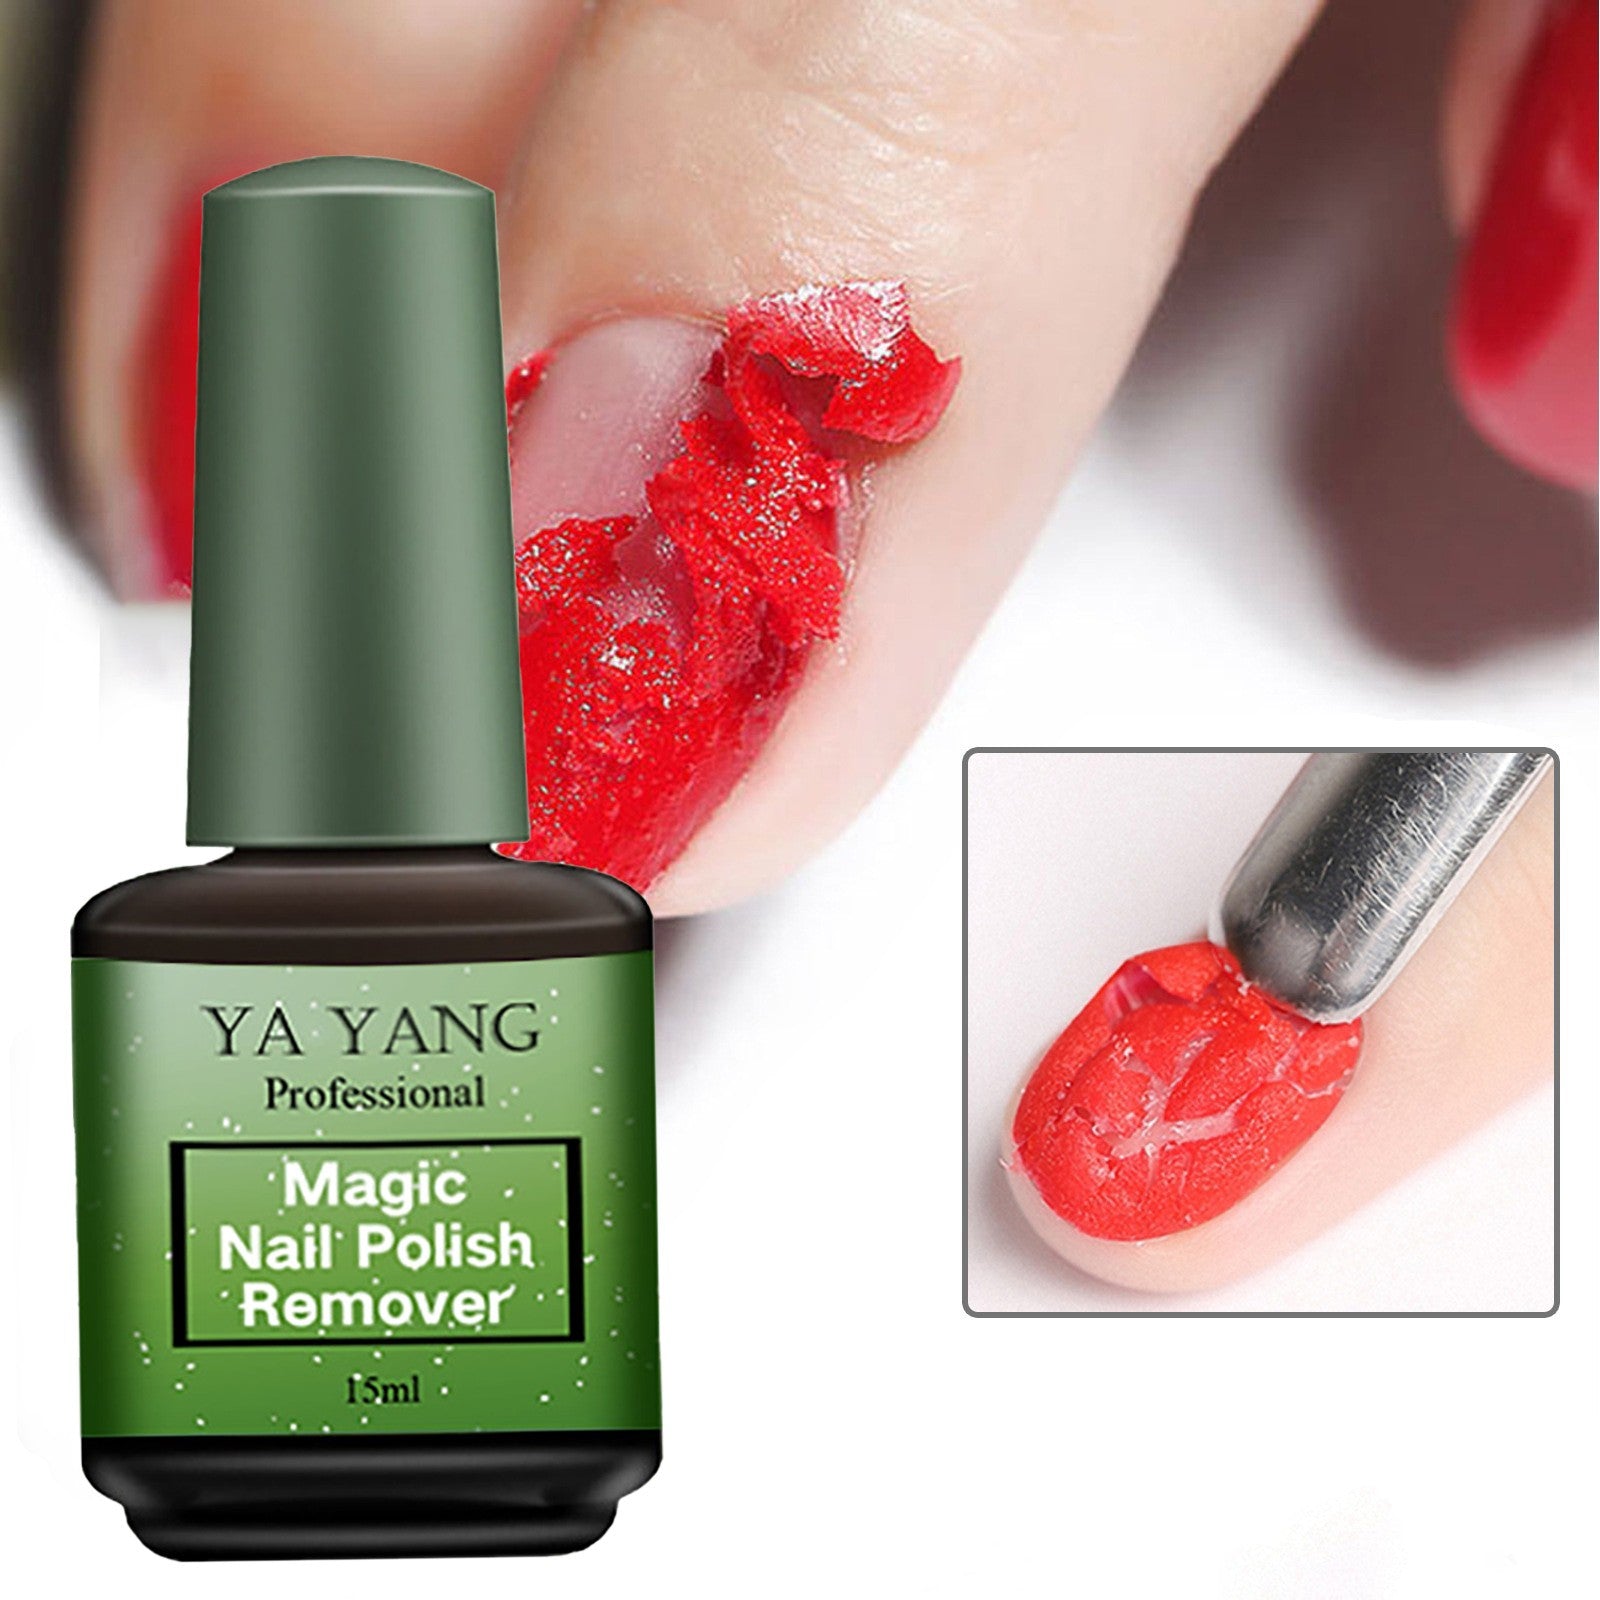 How to Remove Nail Polish from Nails, Skin, Clothing, Plus DIY Options